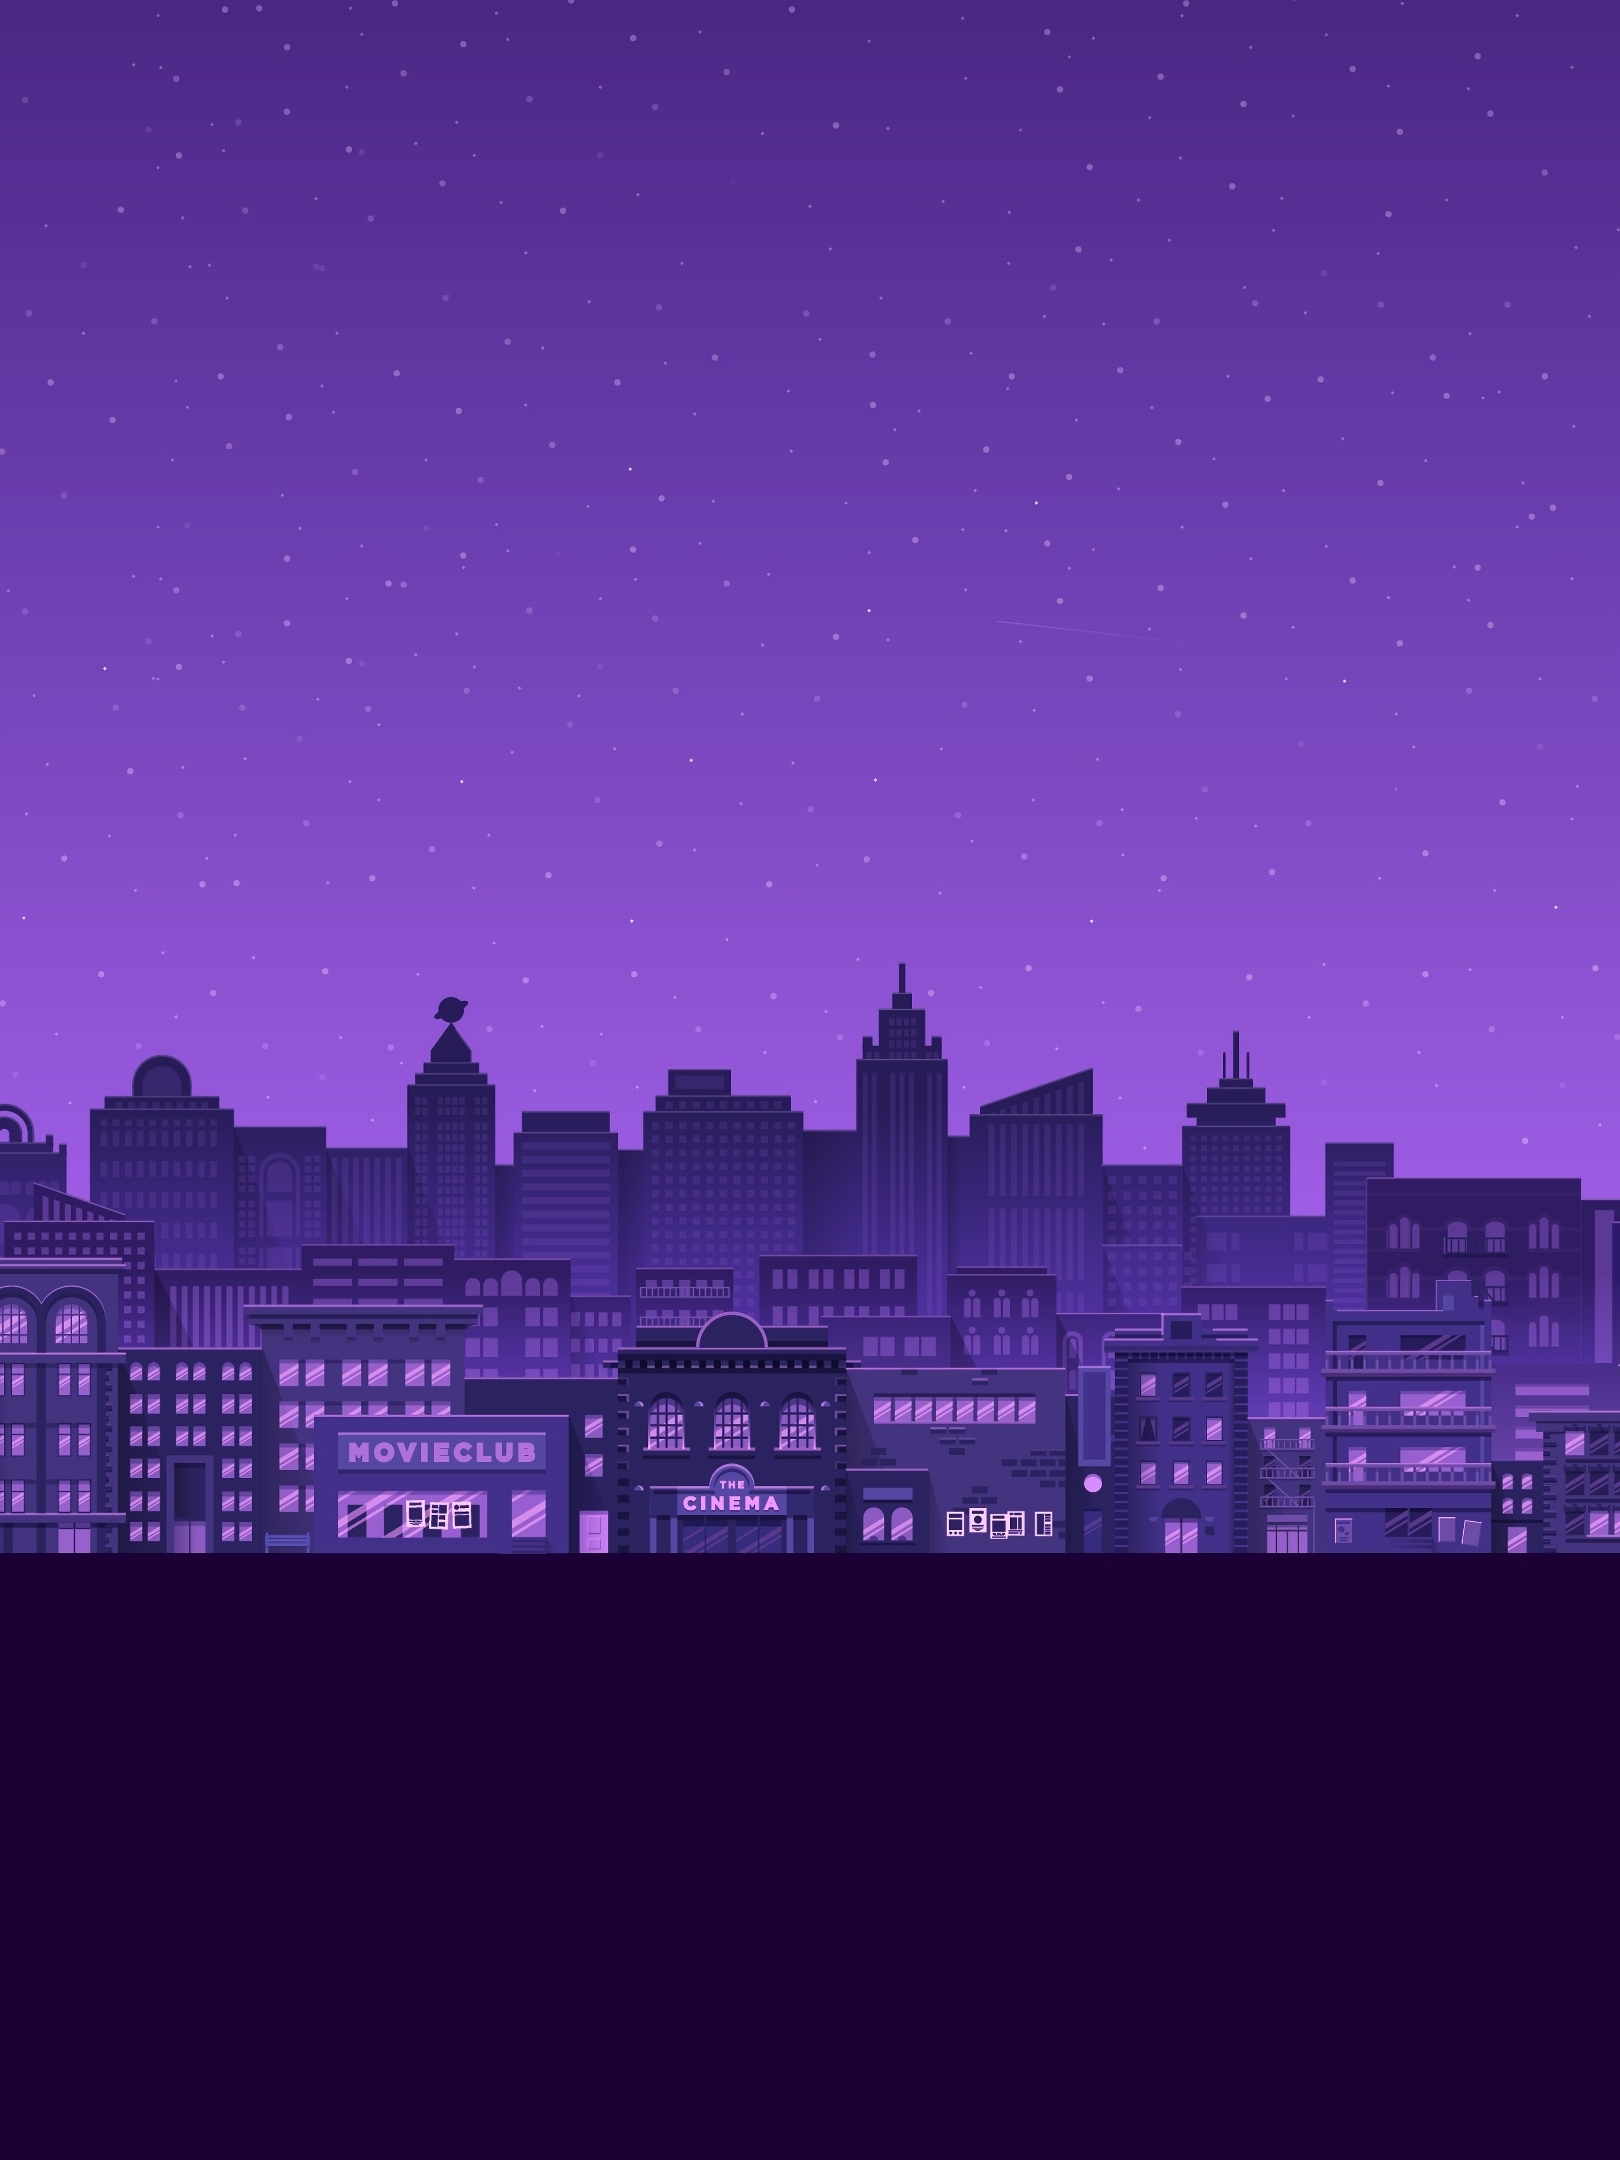 A purple cityscape at night with a purple sky - 90s anime